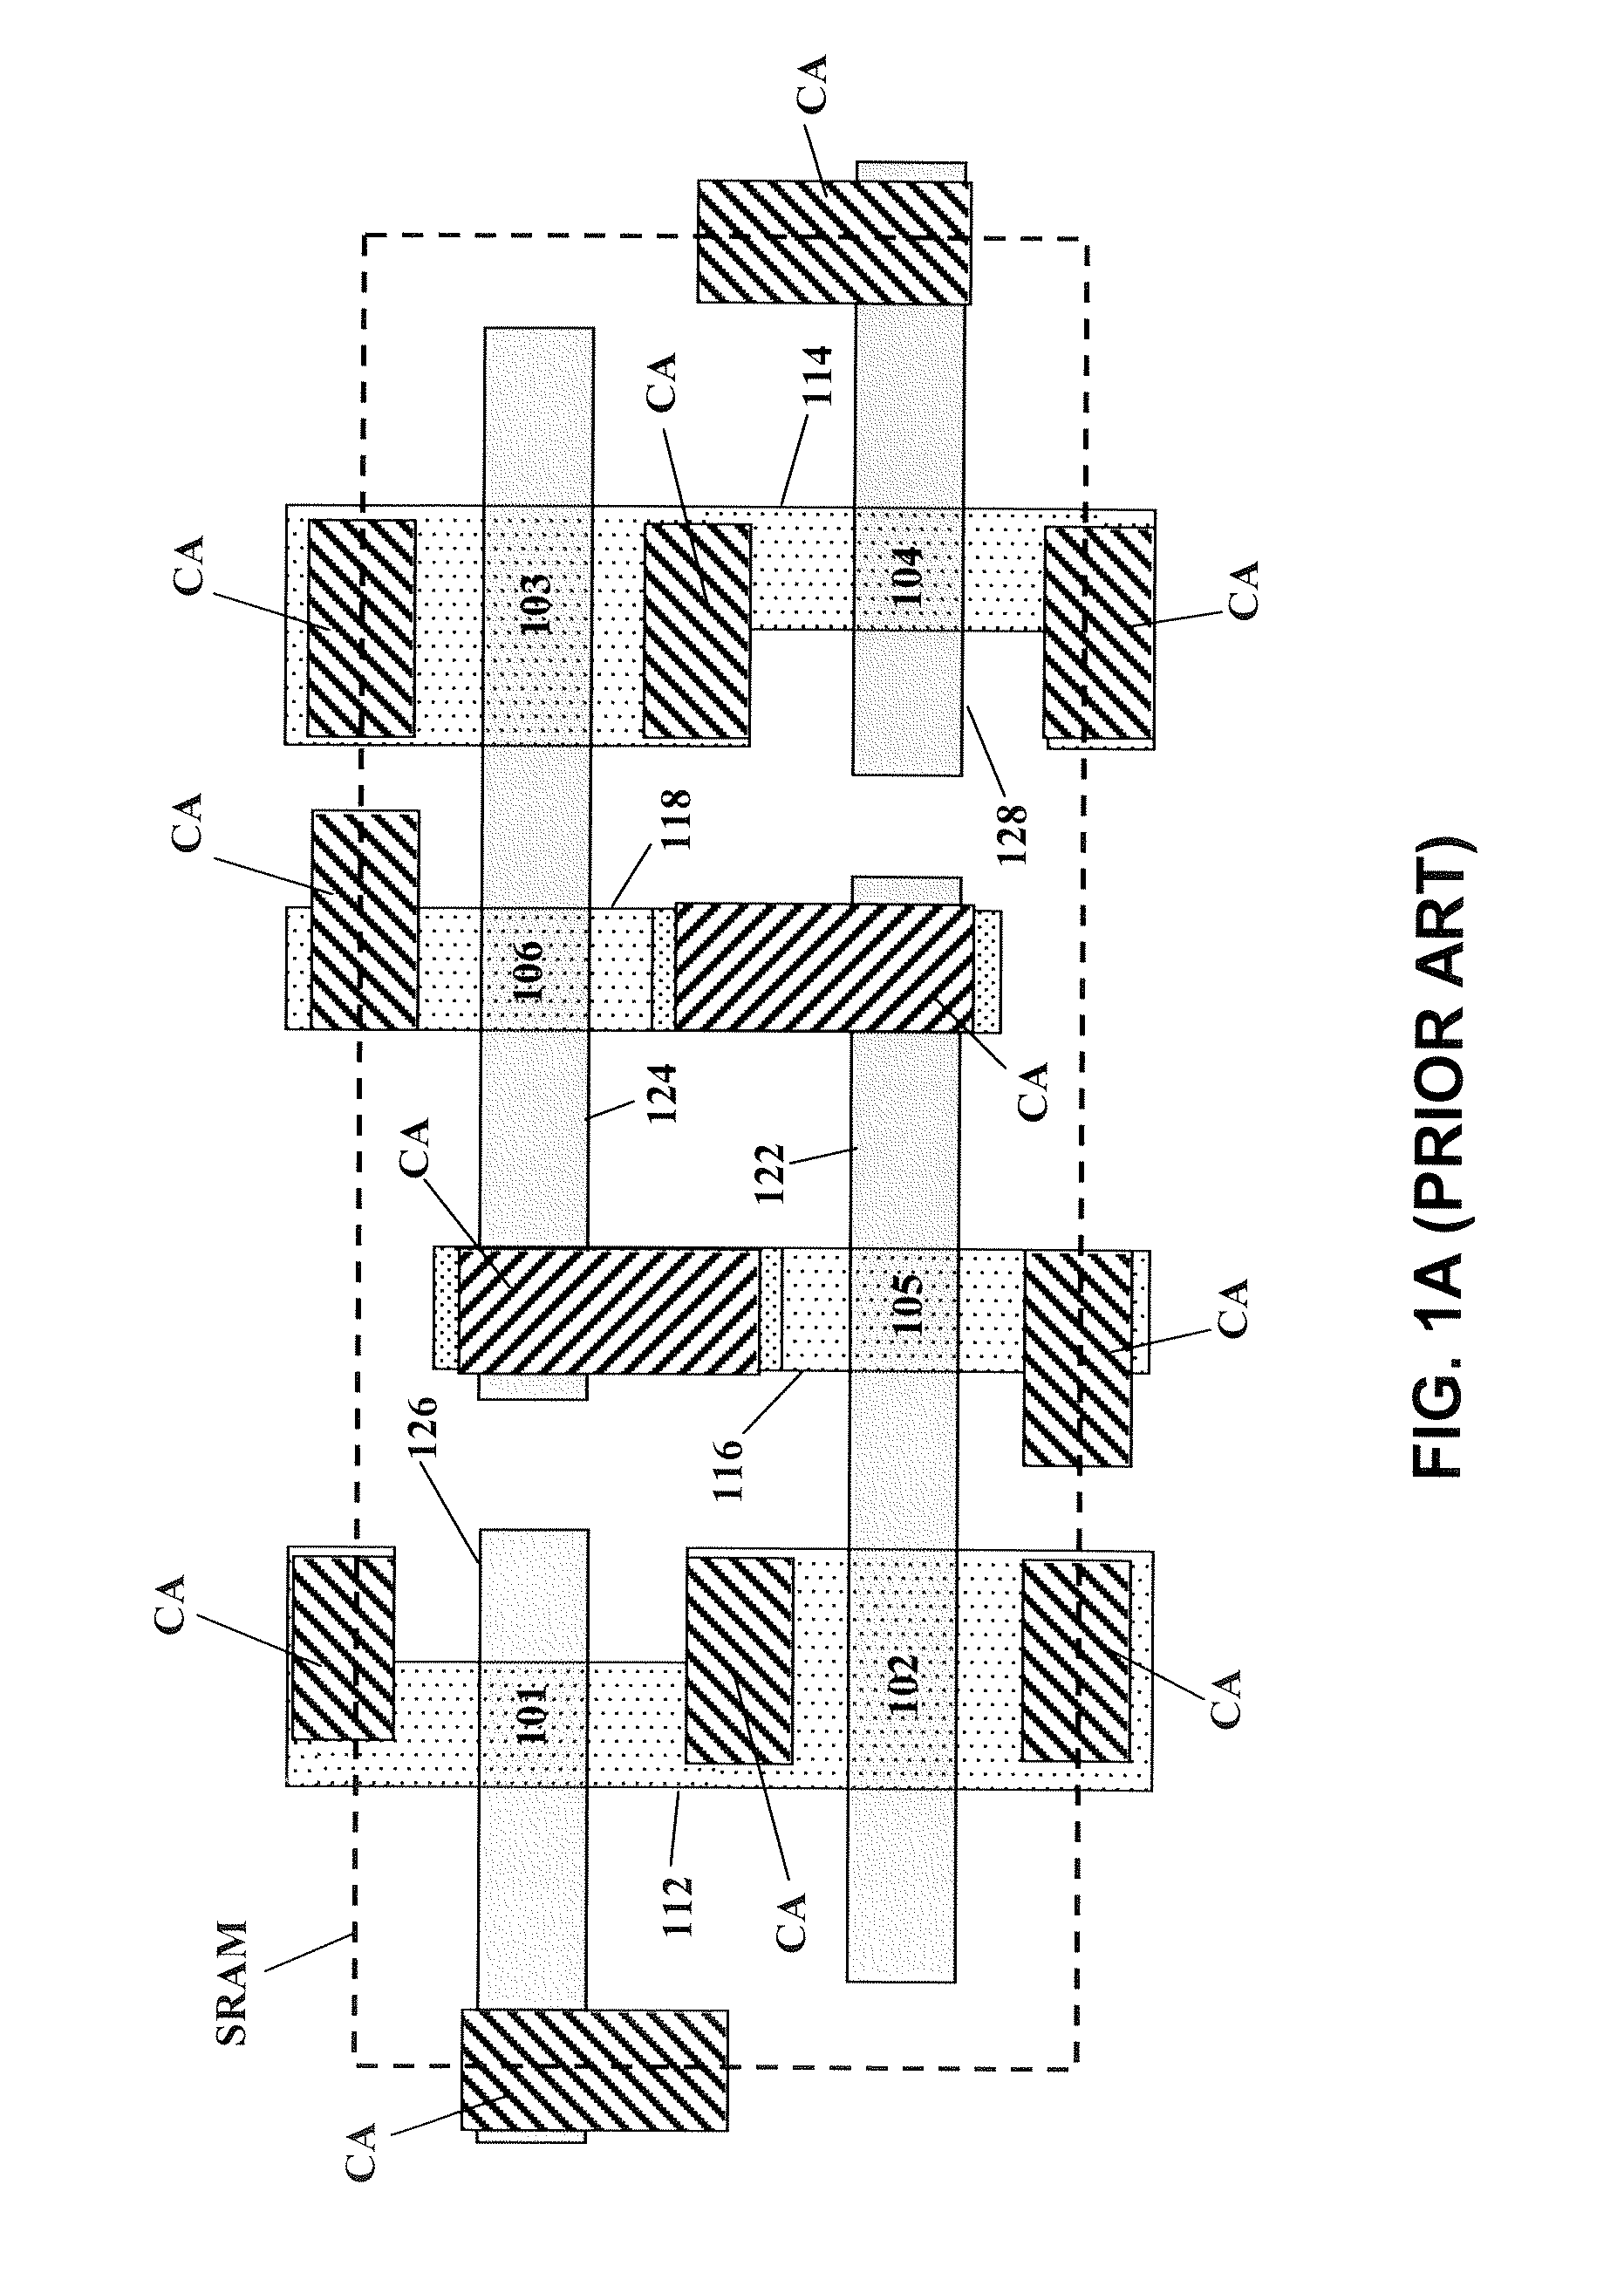 Sub-lithographic local interconnects, and methods for forming same